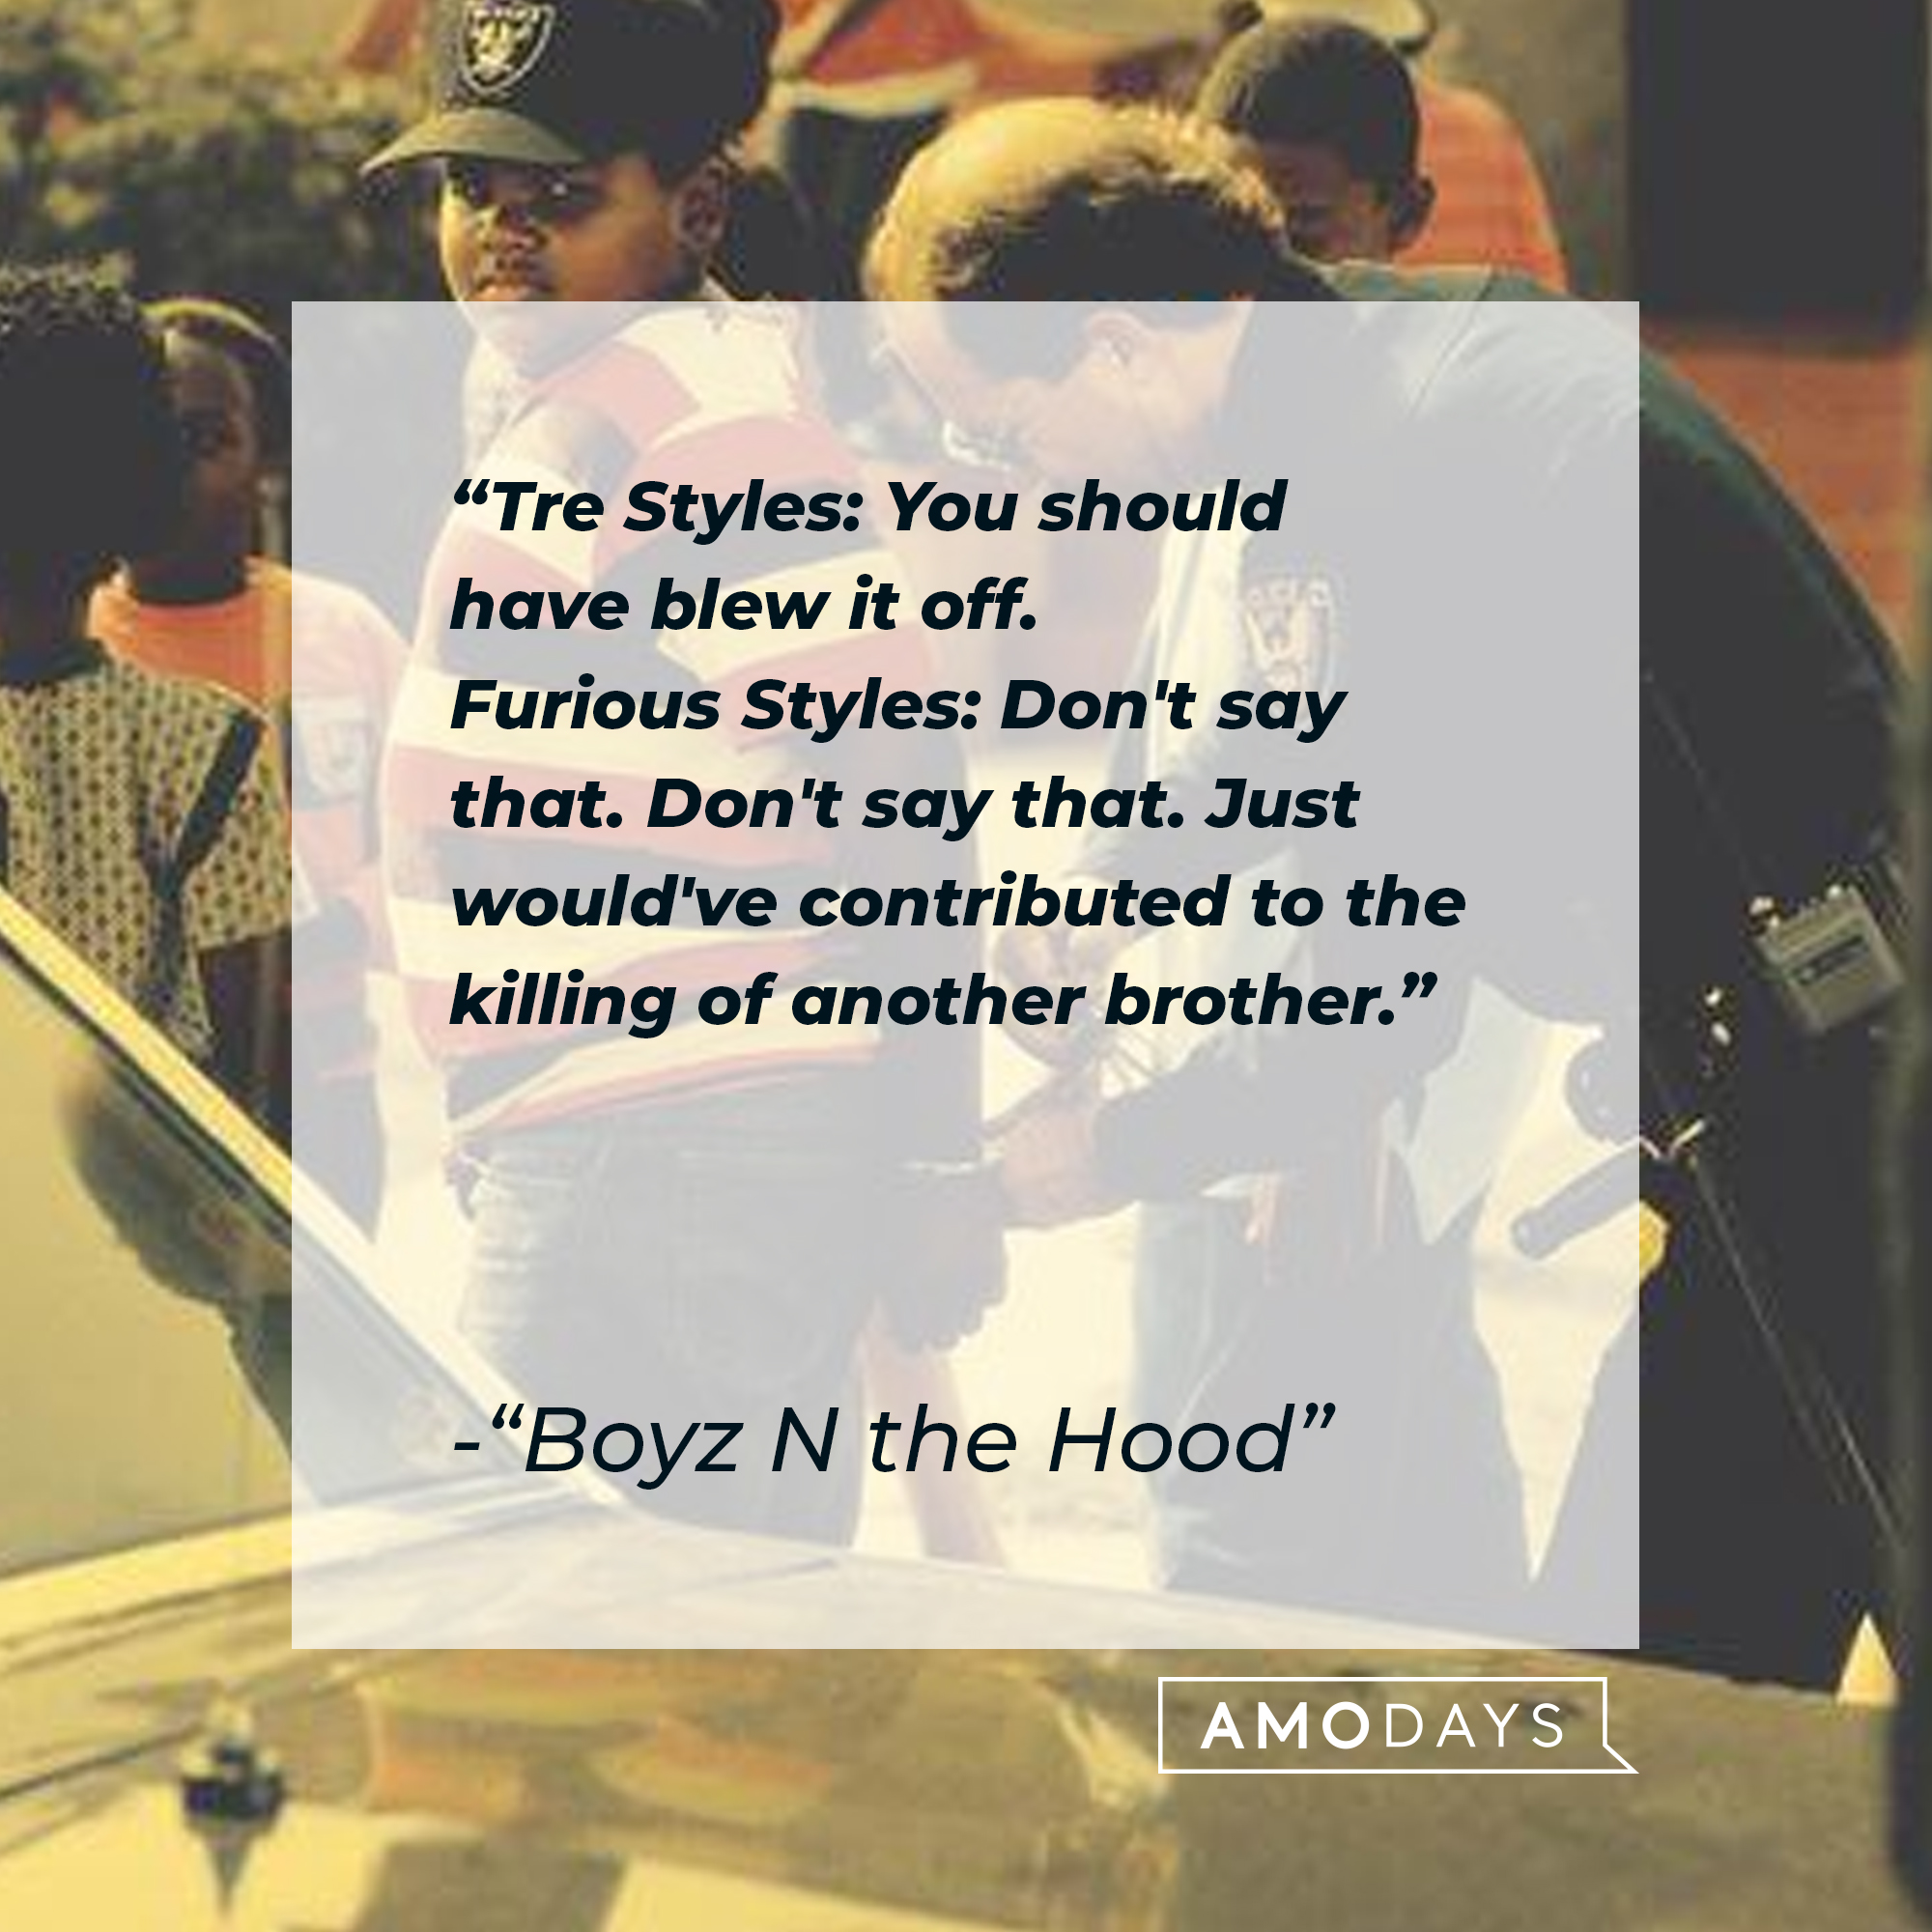 Tre Style's dialogue in "Boyz N the Hood:" "Tre Styles: You should have blew it off. ; Furious Styles: "Don't say that. Don't say that. Just would've contributed to the killing of another brother." | Source: Facebook.com/BoyzNtheHood